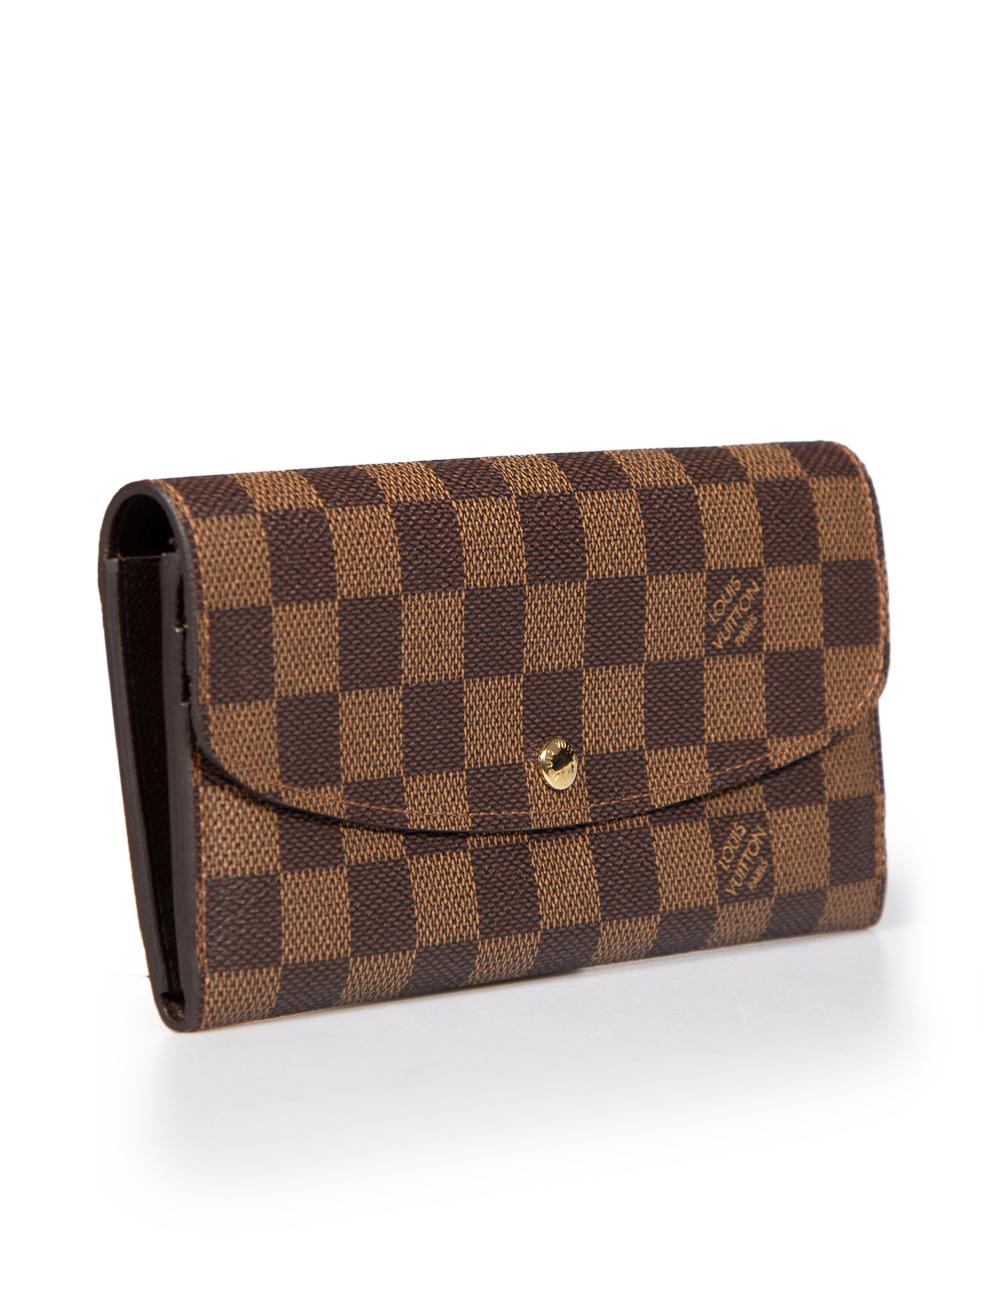 CONDITION is Very good. Hardly any visible wear to the wallet is evident on this used Louis Vuitton designer resale item. This item comes with an original dust bag and box.
 
 
 
 Details
 
 
 Model: Emilie
 
 Brown
 
 Coated canvas
 
 Wallet
 
